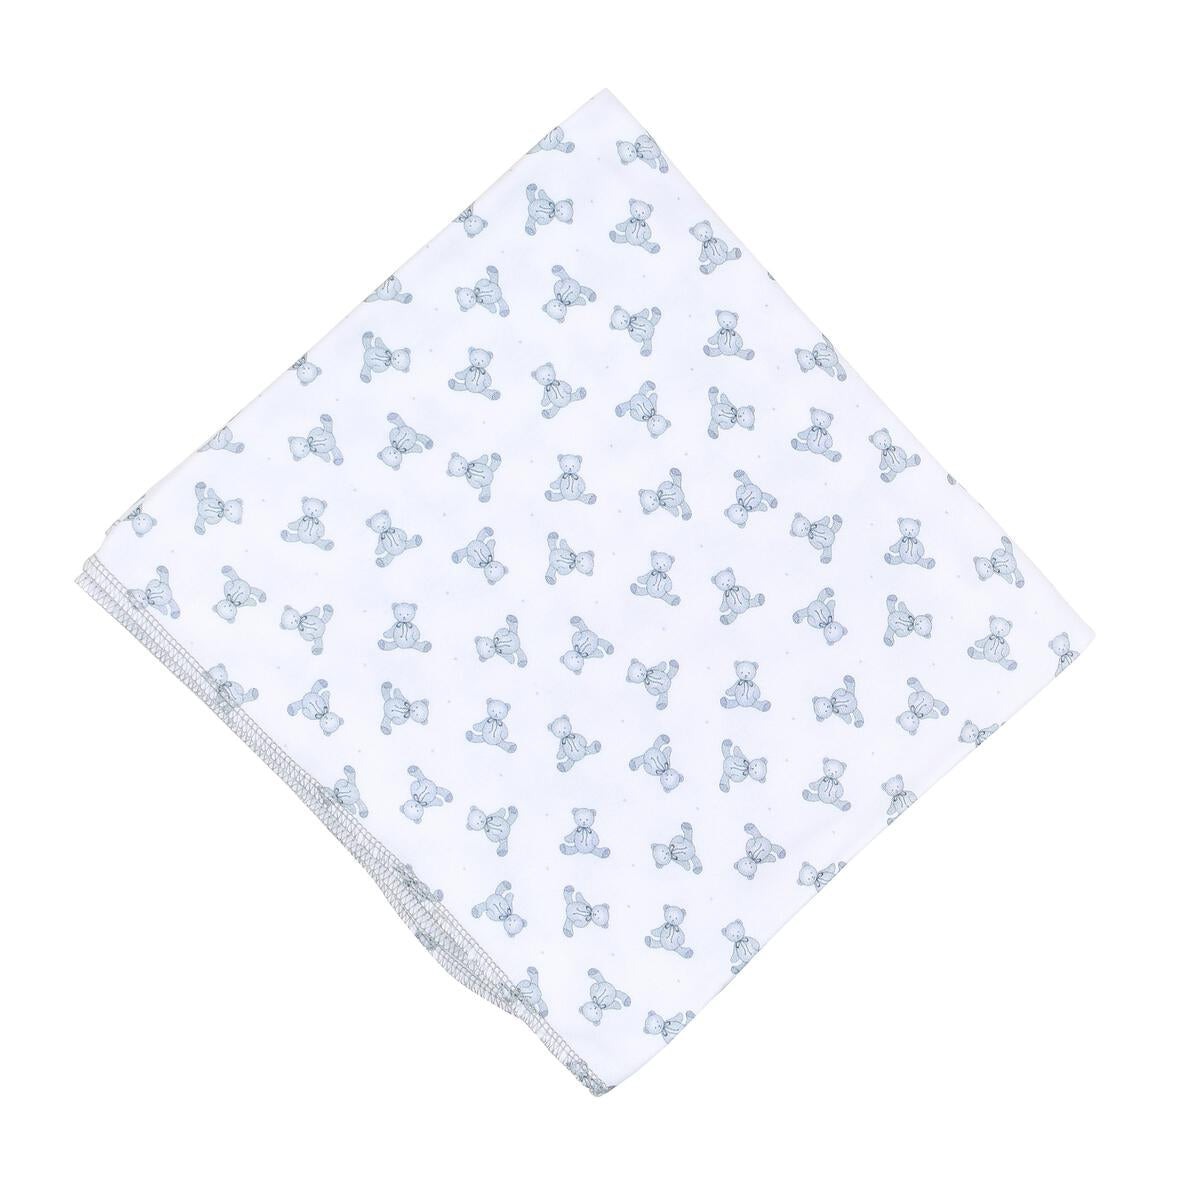 Baby's Teddy Printed Swaddle Blanket, Silver